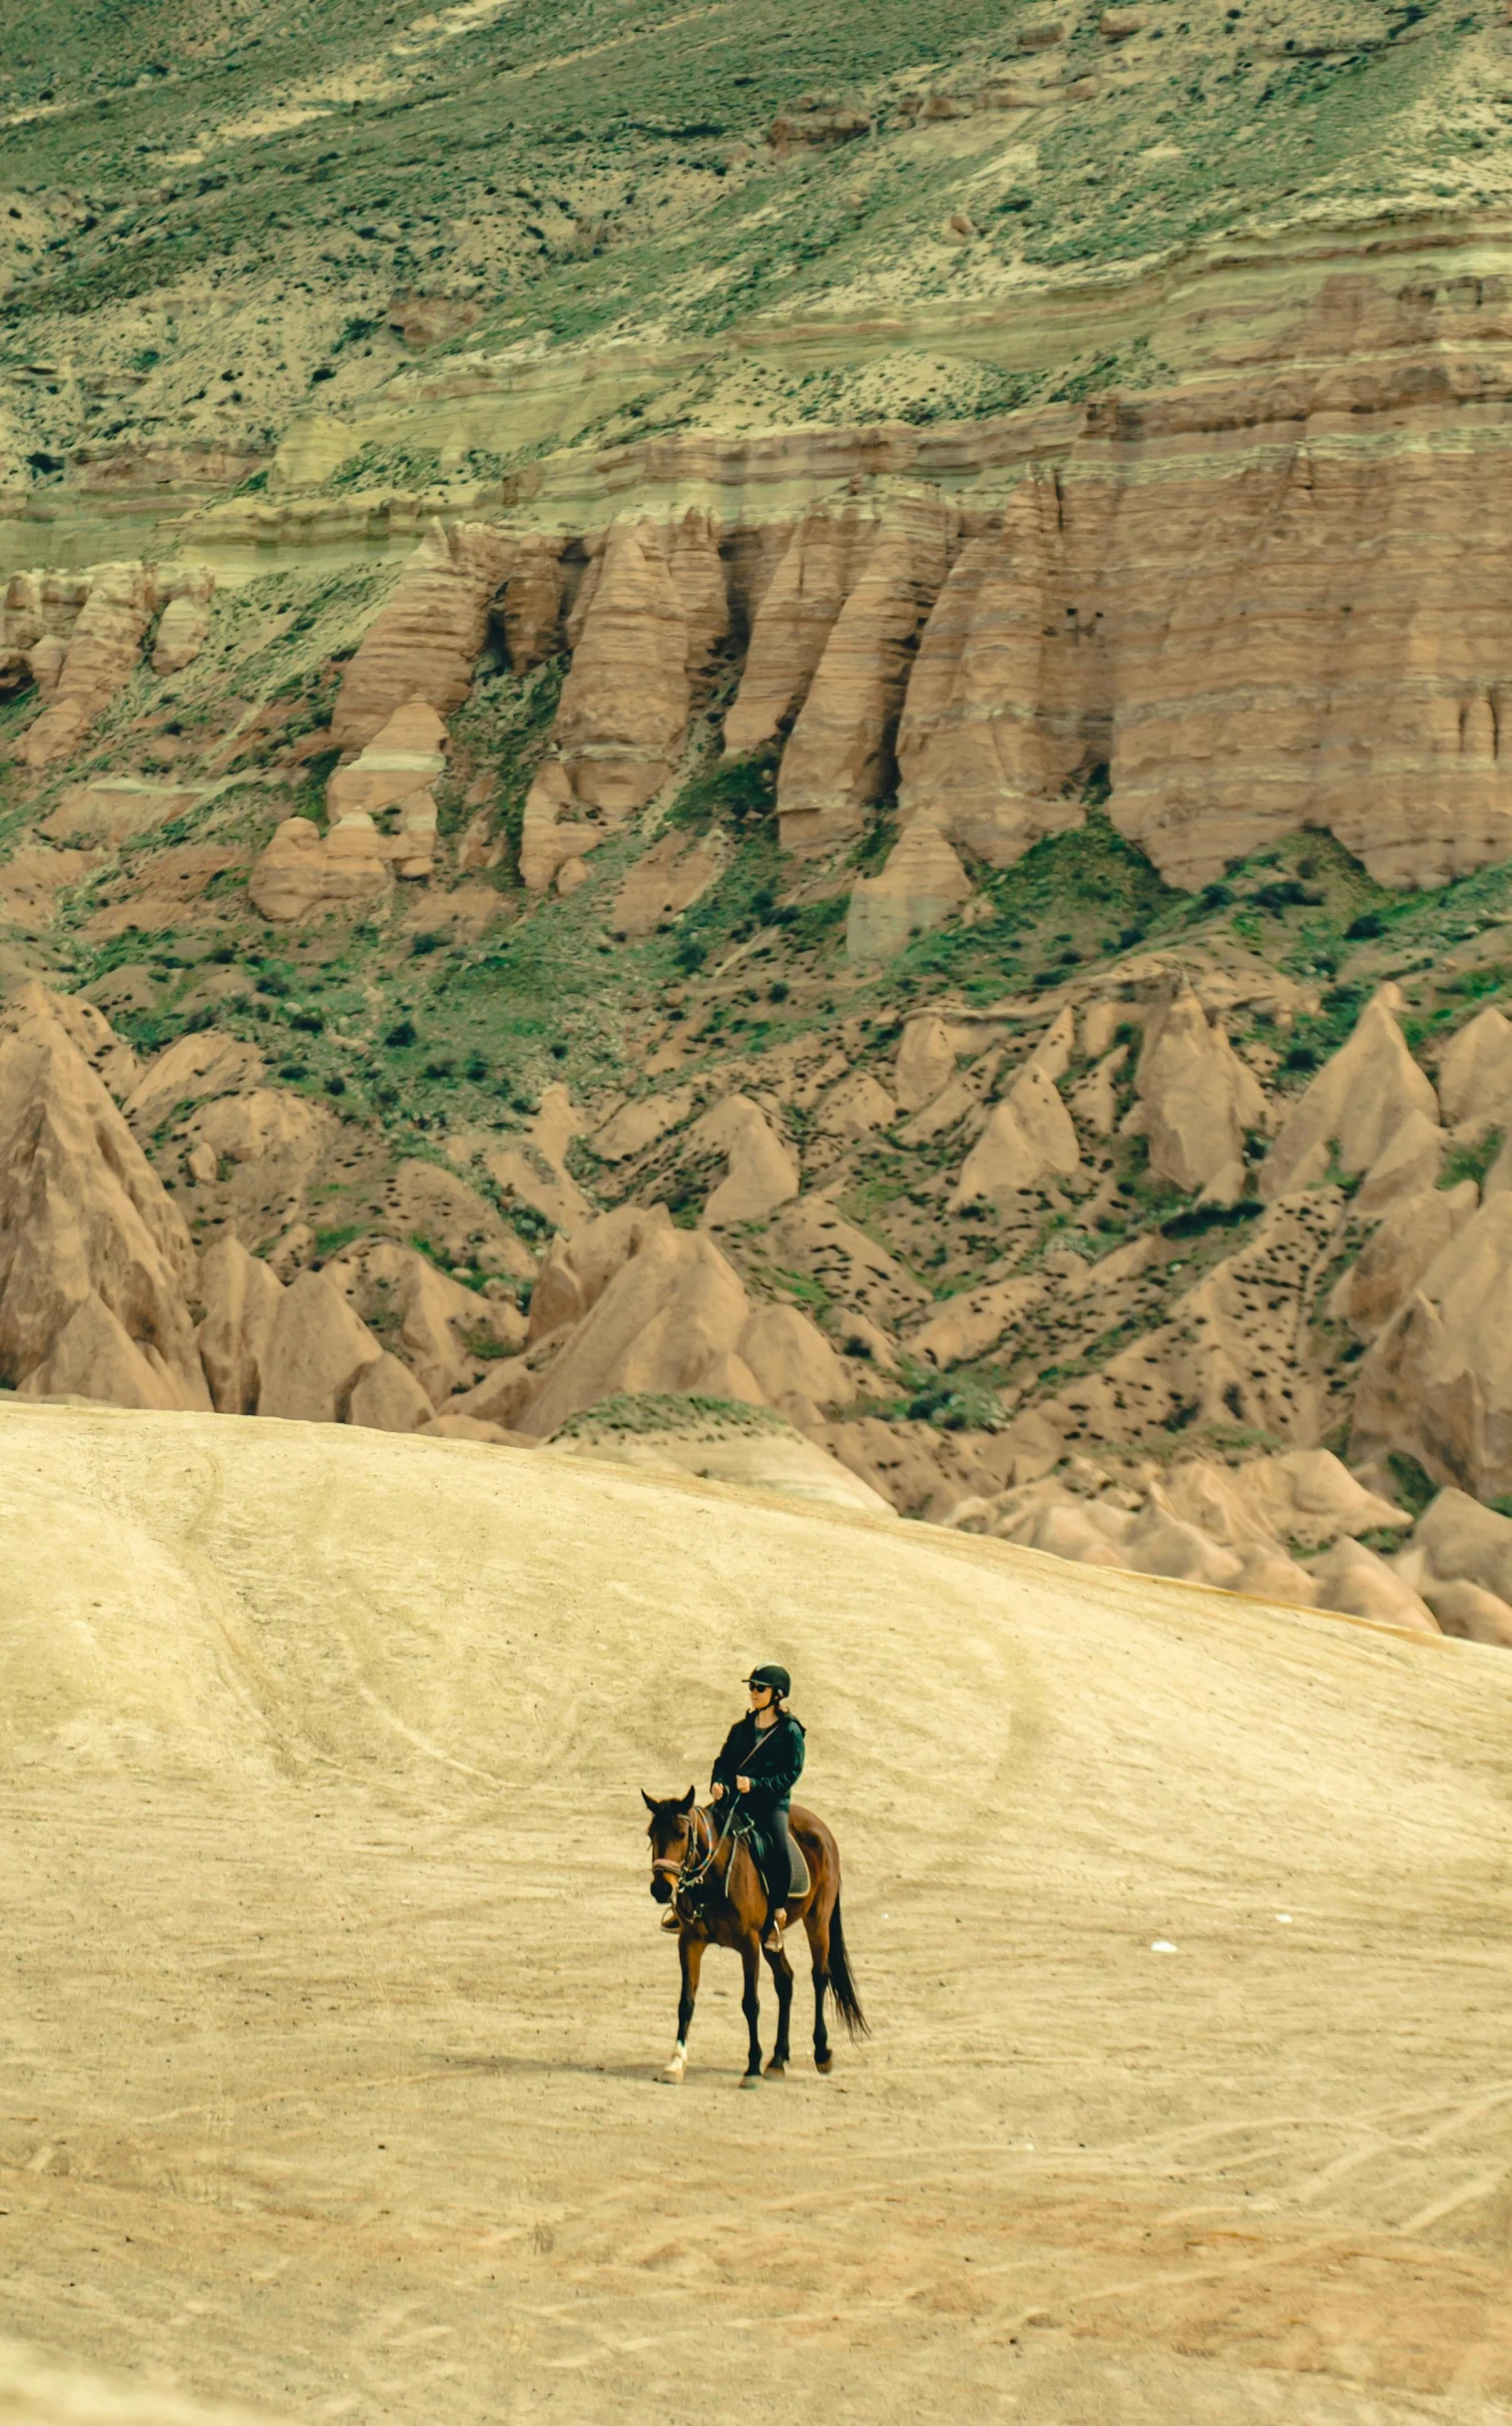 a man rides a horse up the mountain side